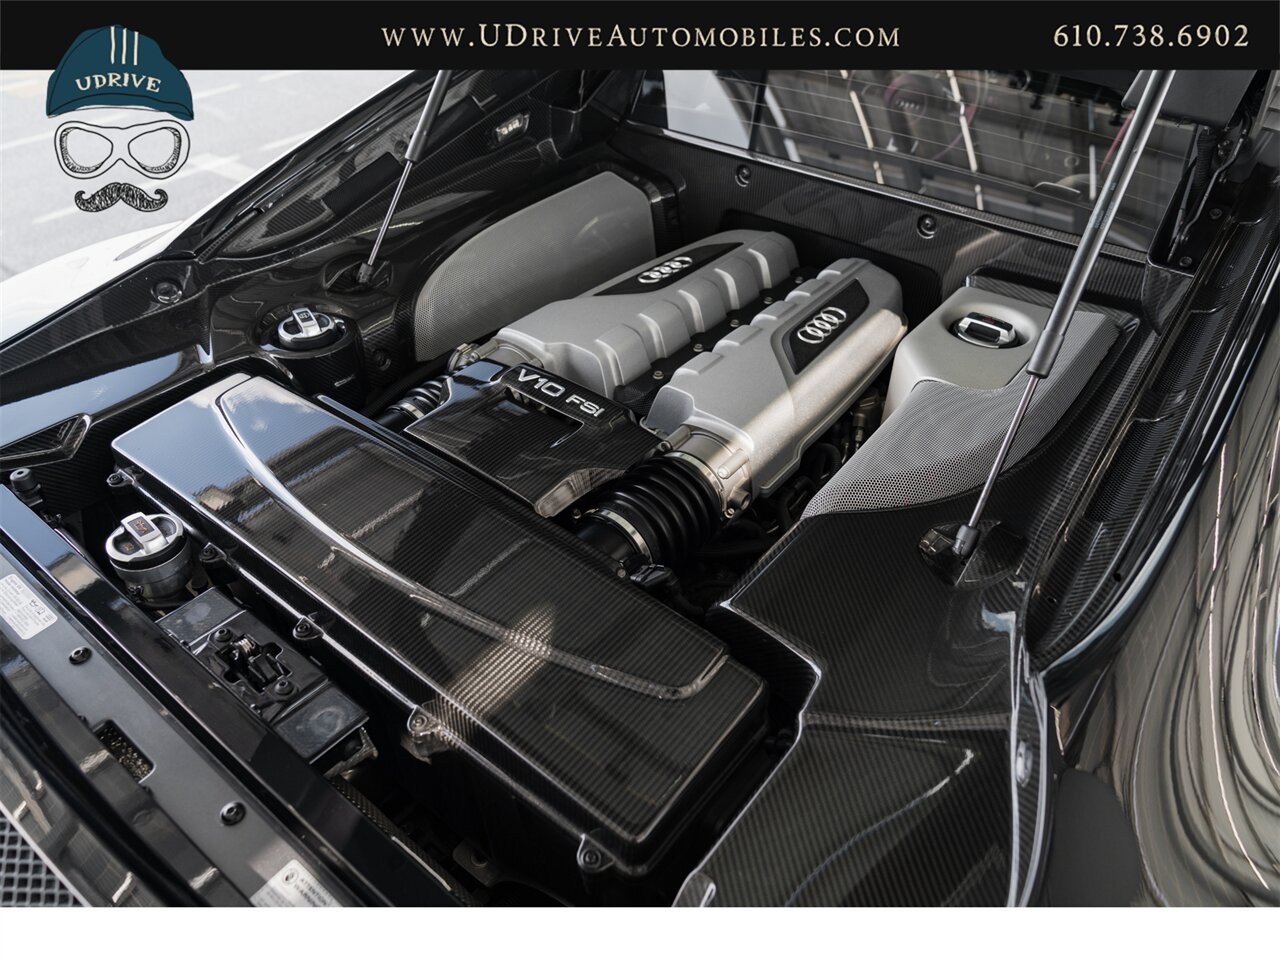 2011 Audi R8 5.2 Quattro  V10 6 Speed Manual - Photo 46 - West Chester, PA 19382